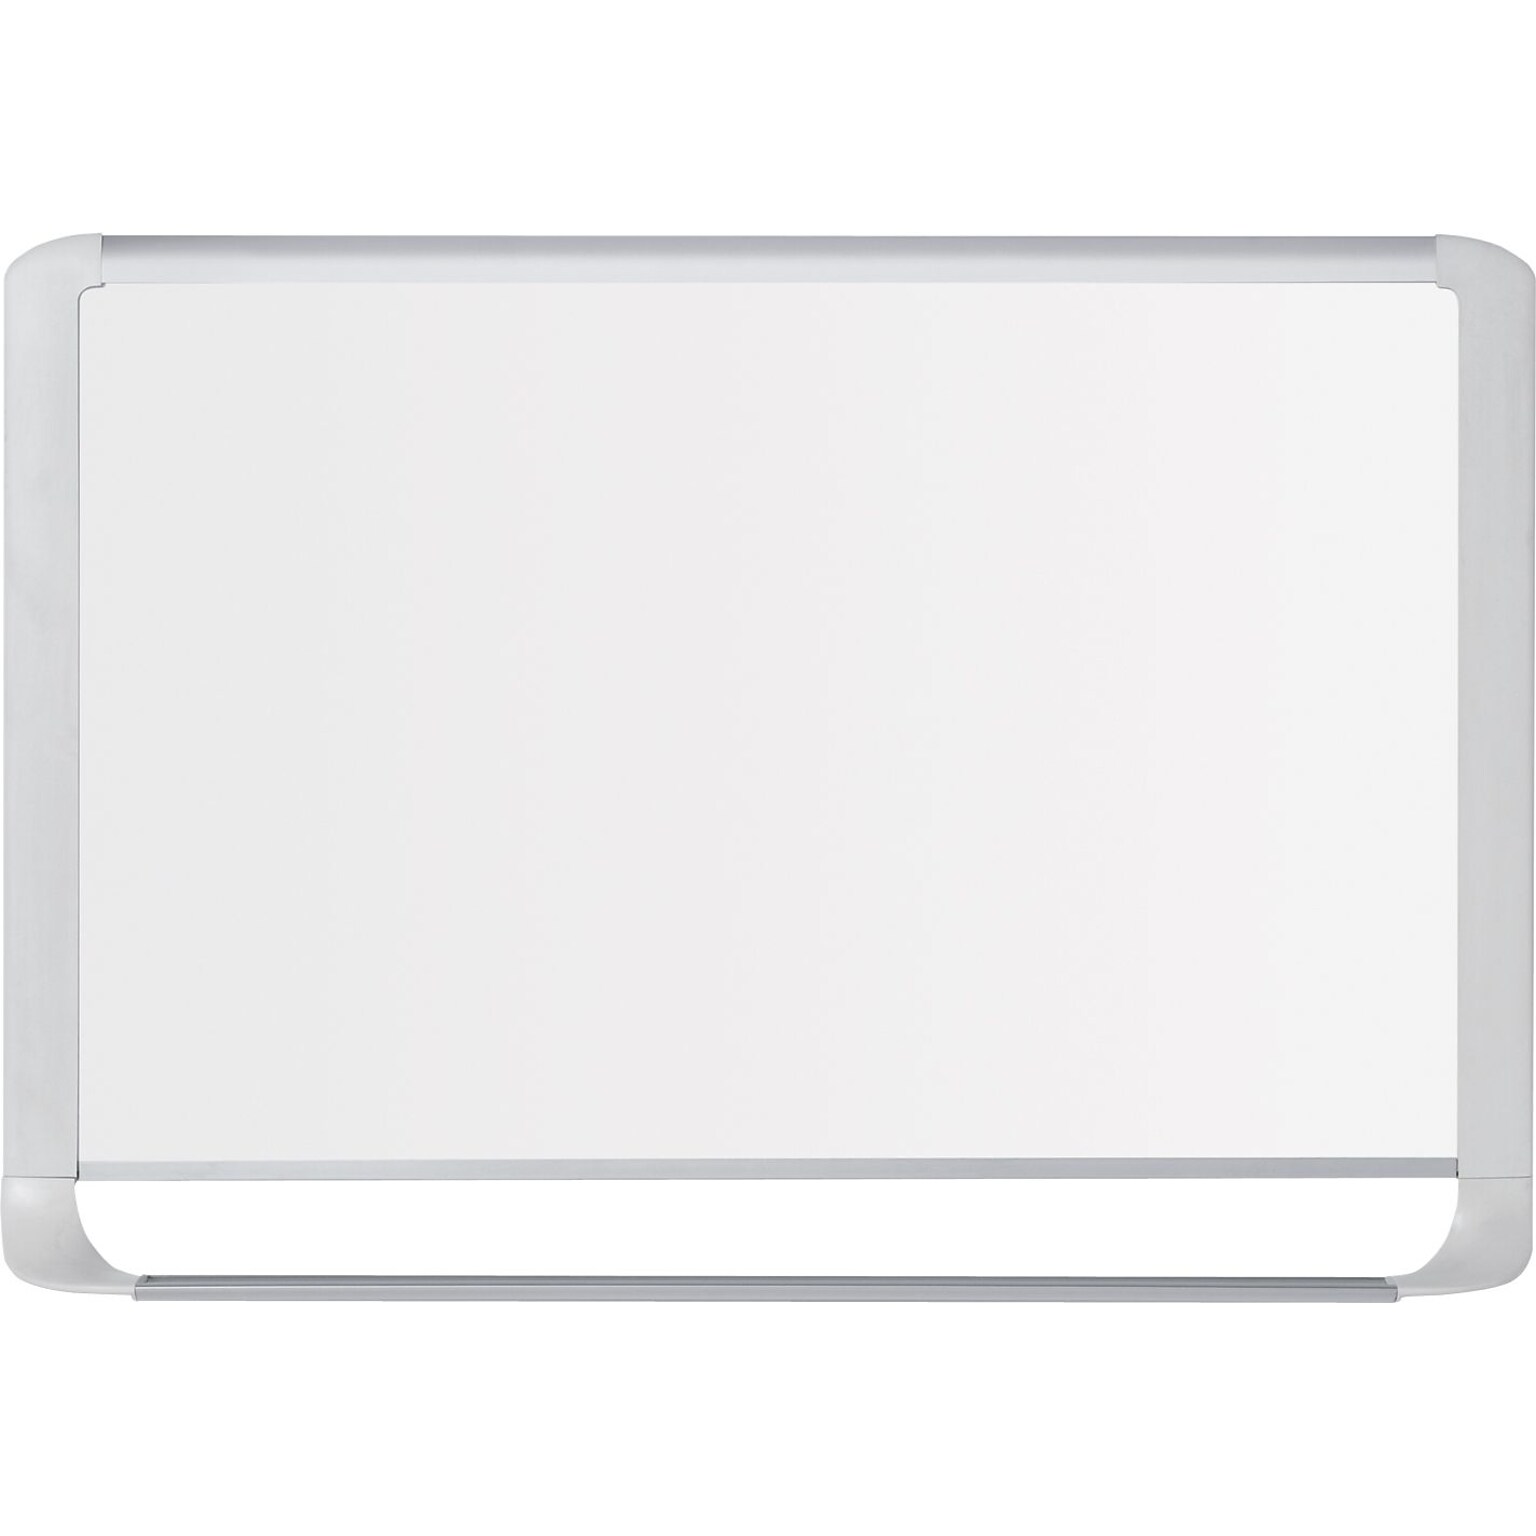 MasterVision® Gold Ultra™ 36 x 48 x 7/10 Steel Magnetic Dry Erase Boards, White (MVI050205)